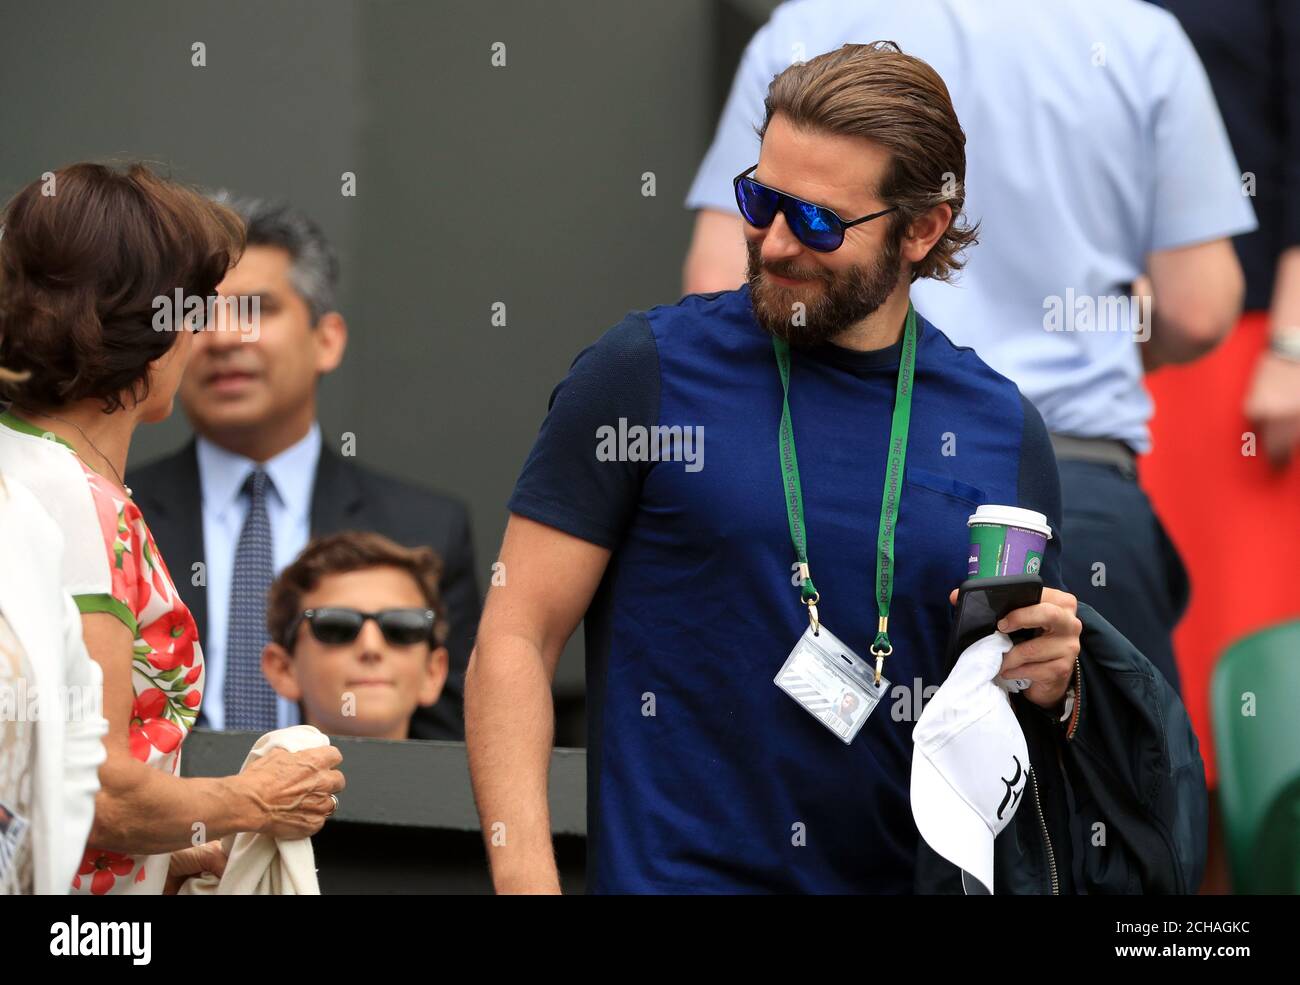 Lynette Federer greets Bradley Cooper in Roger Federer's players box on day eleven of the Wimbledon Championships at the All England Lawn Tennis and Croquet Club, Wimbledon. Stock Photo